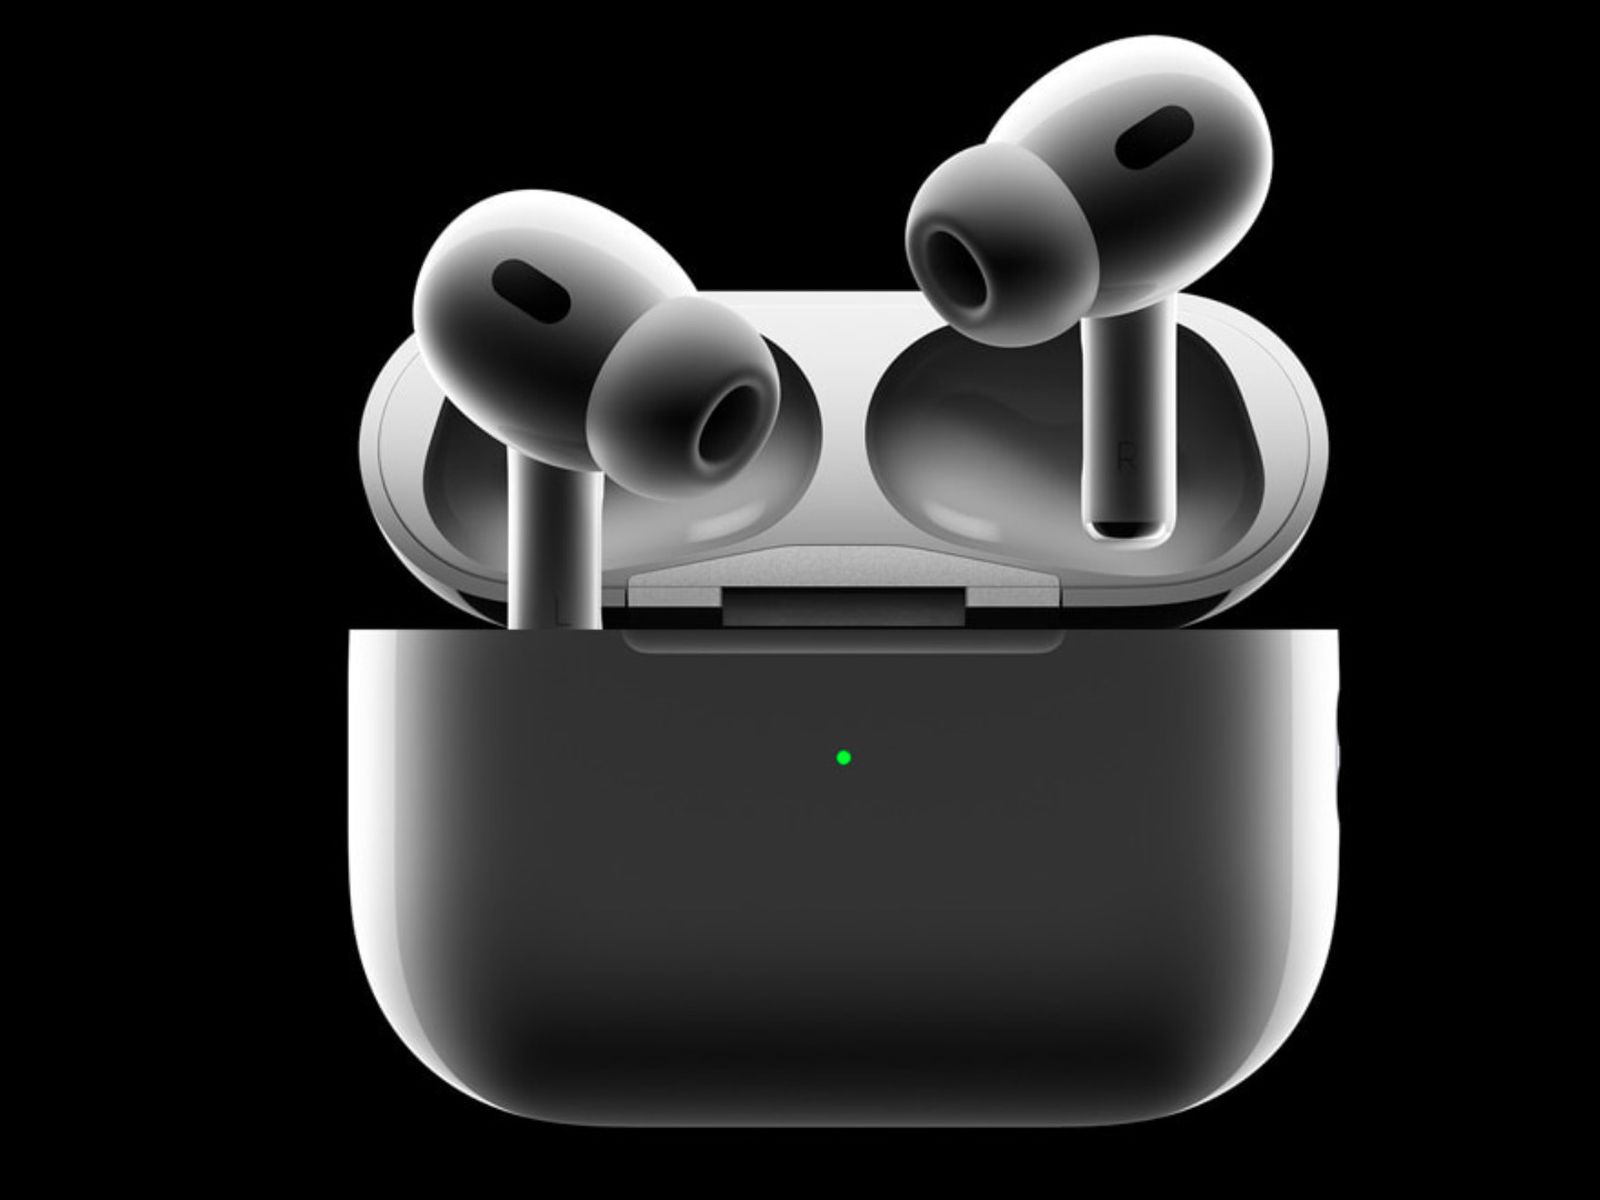 Apple Begins Selling Refurbished AirPods Pro 2 With Lightning Case